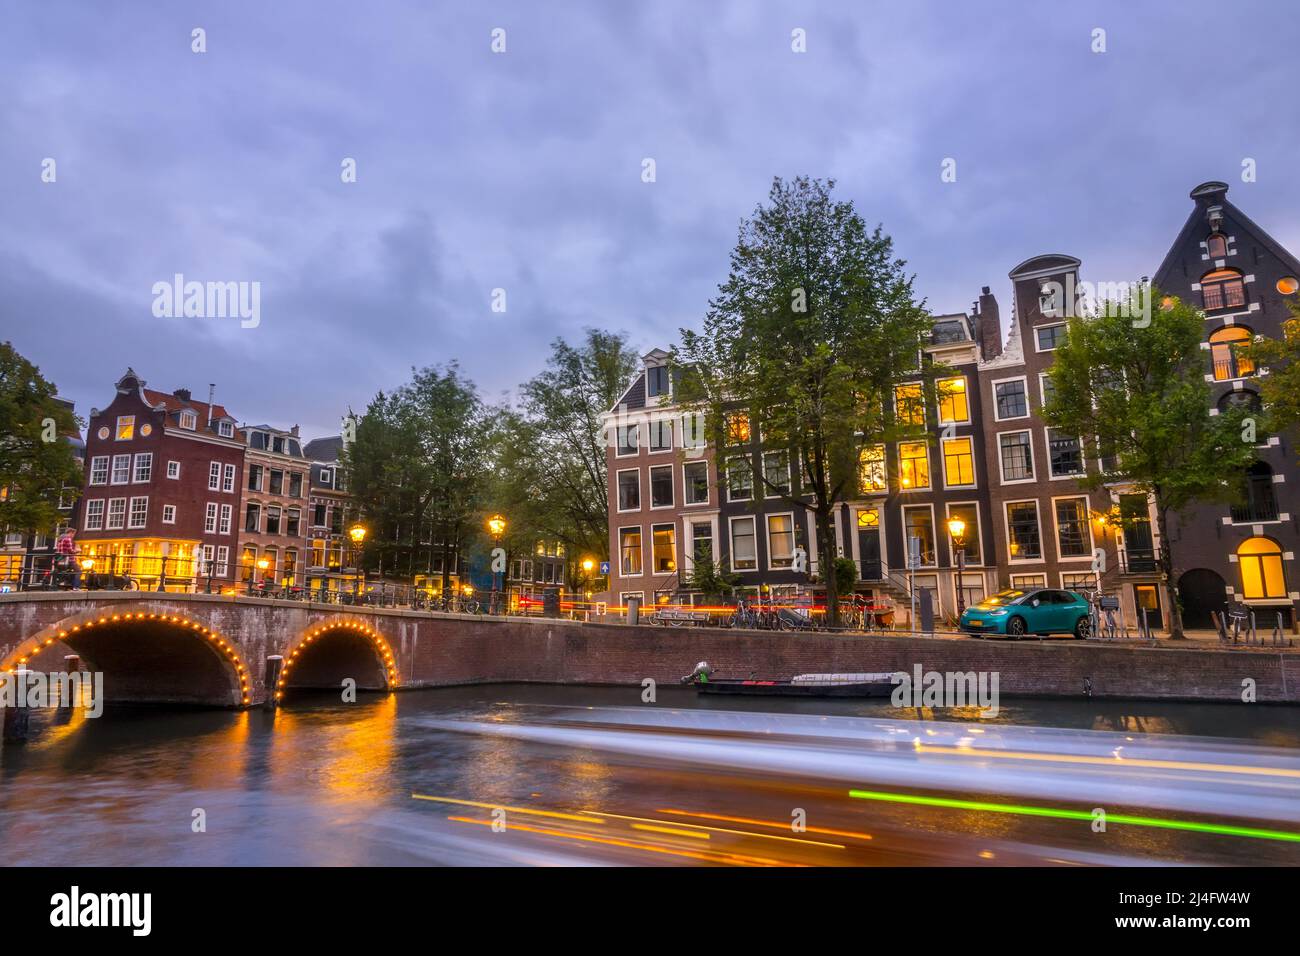 Netherlands. Evening on the Amsterdam canal. Old stone bridge and typical houses on the embankment. Traffic on the water and streets Stock Photo